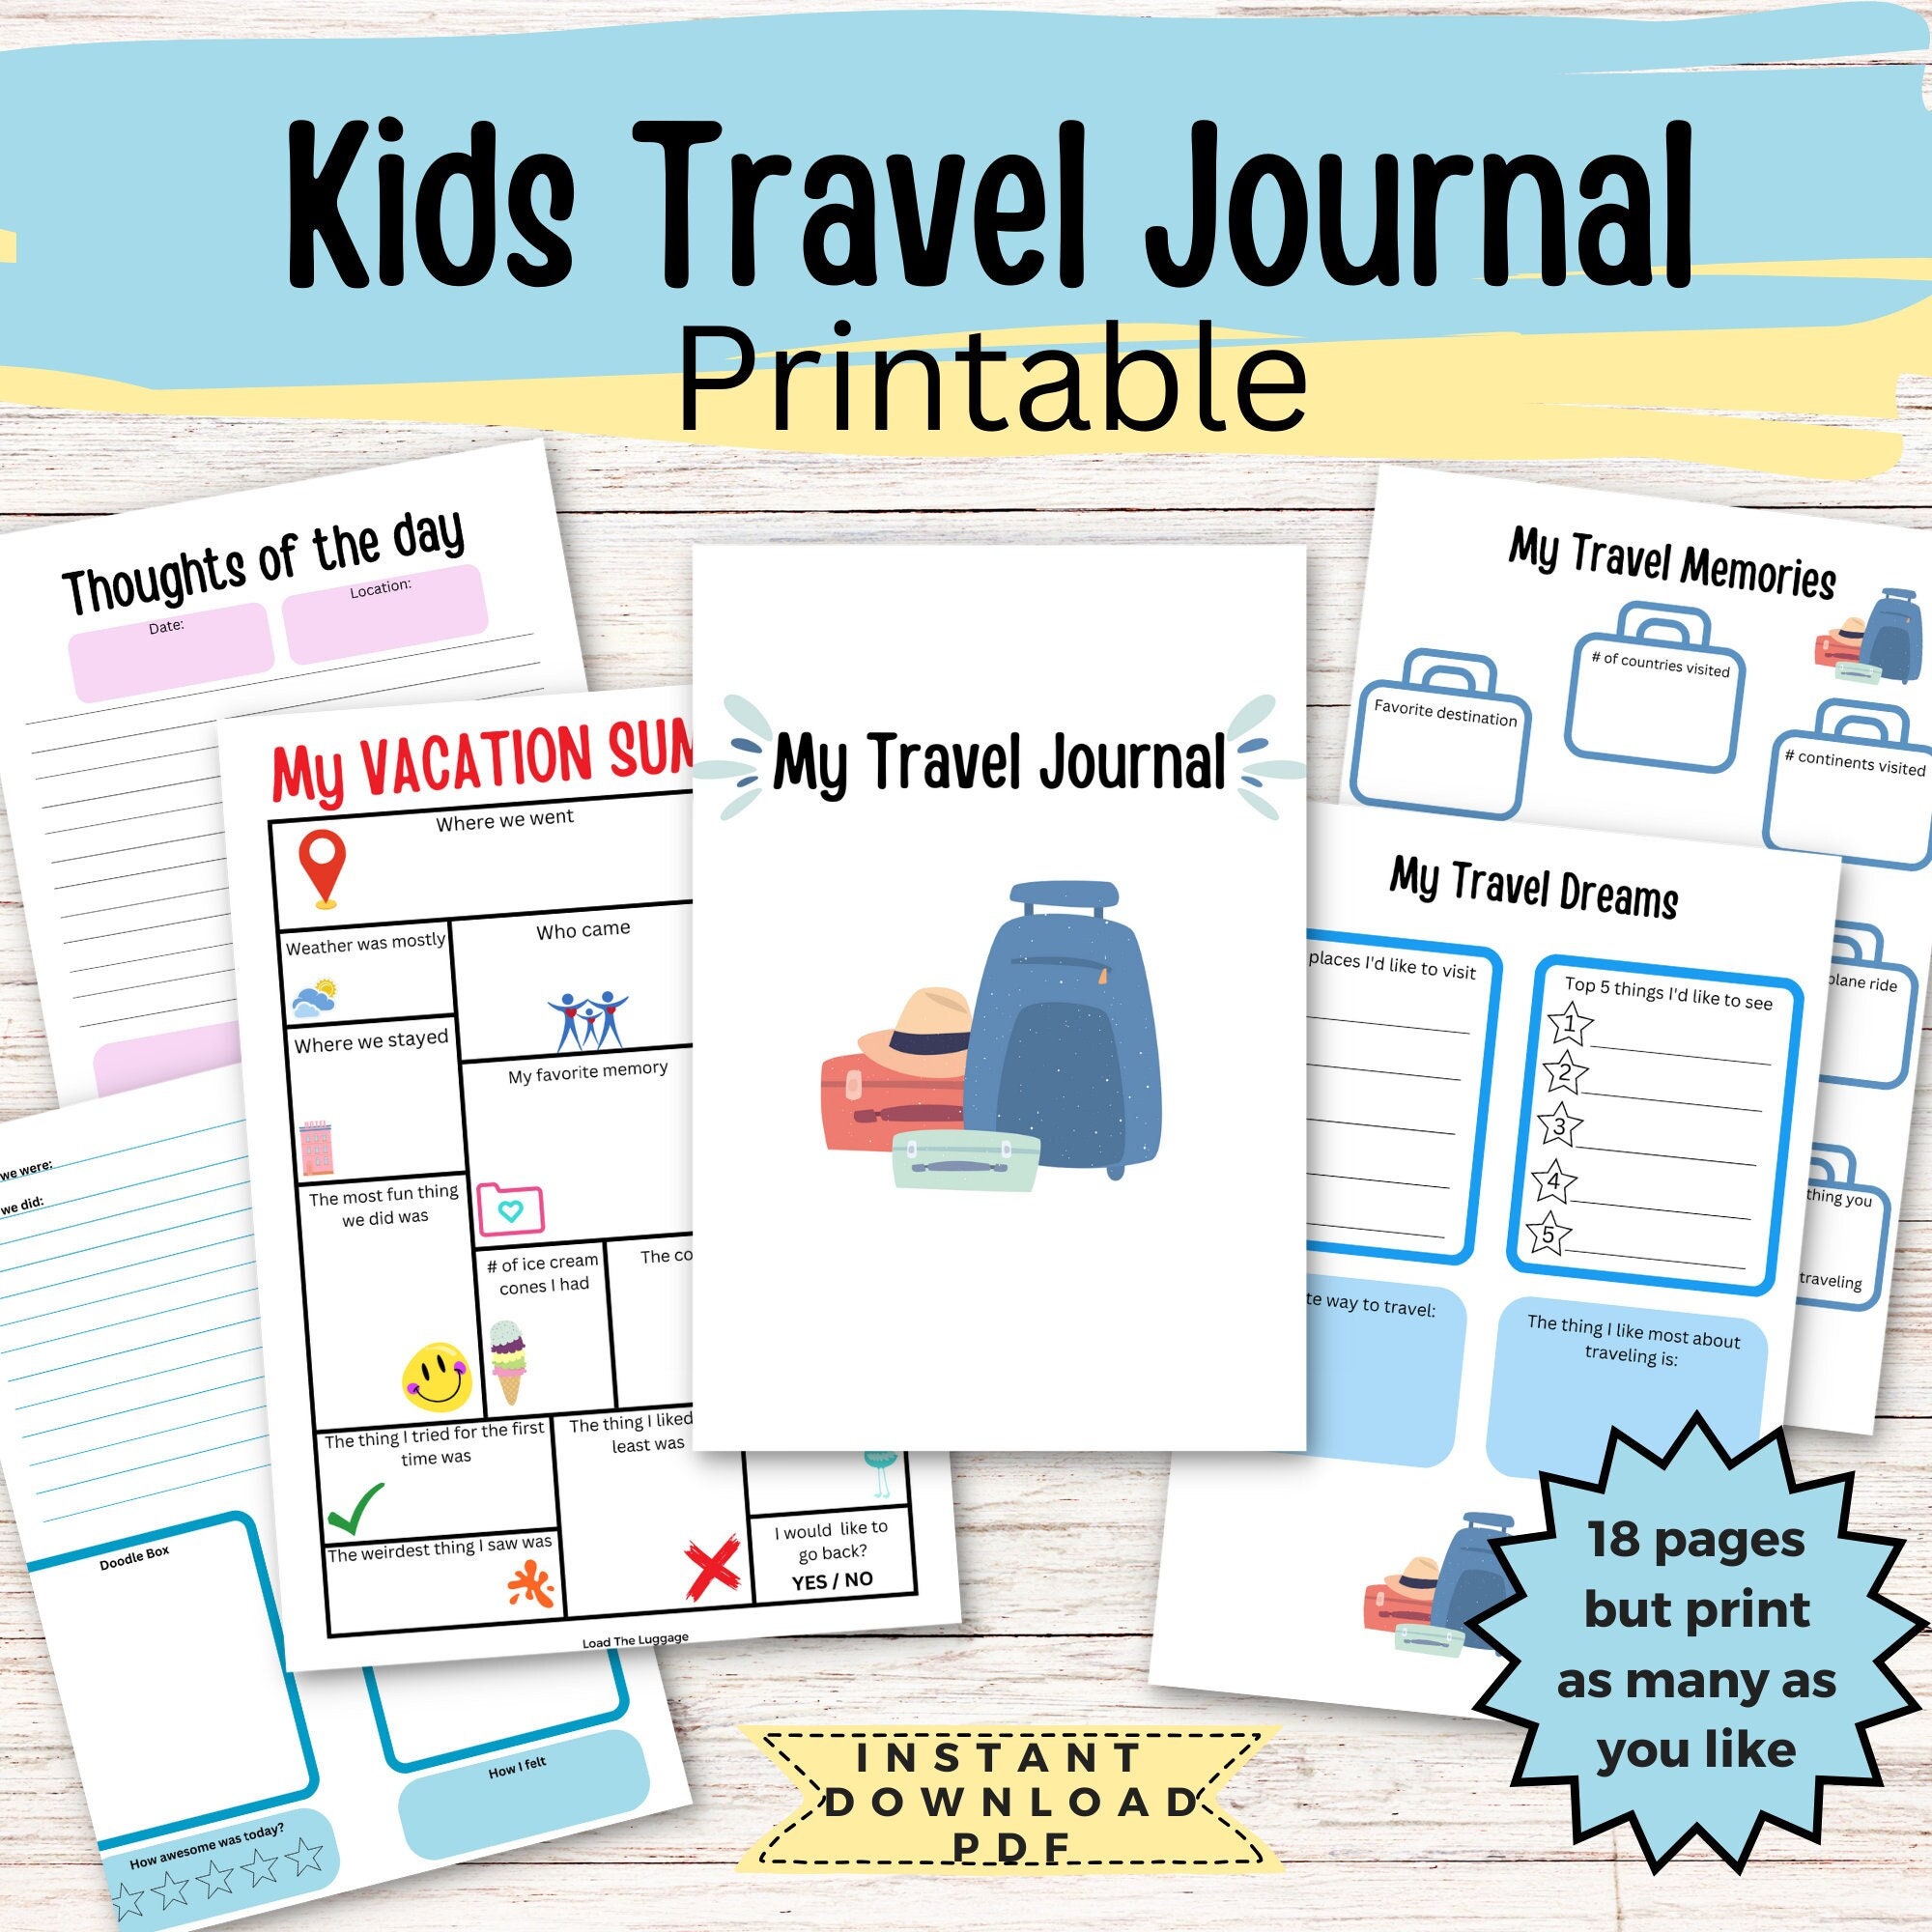 travel memory book: Record your travel memories and emotions using guided  prompts in this 8.5x11 travel keepsake diary designed for both boys and